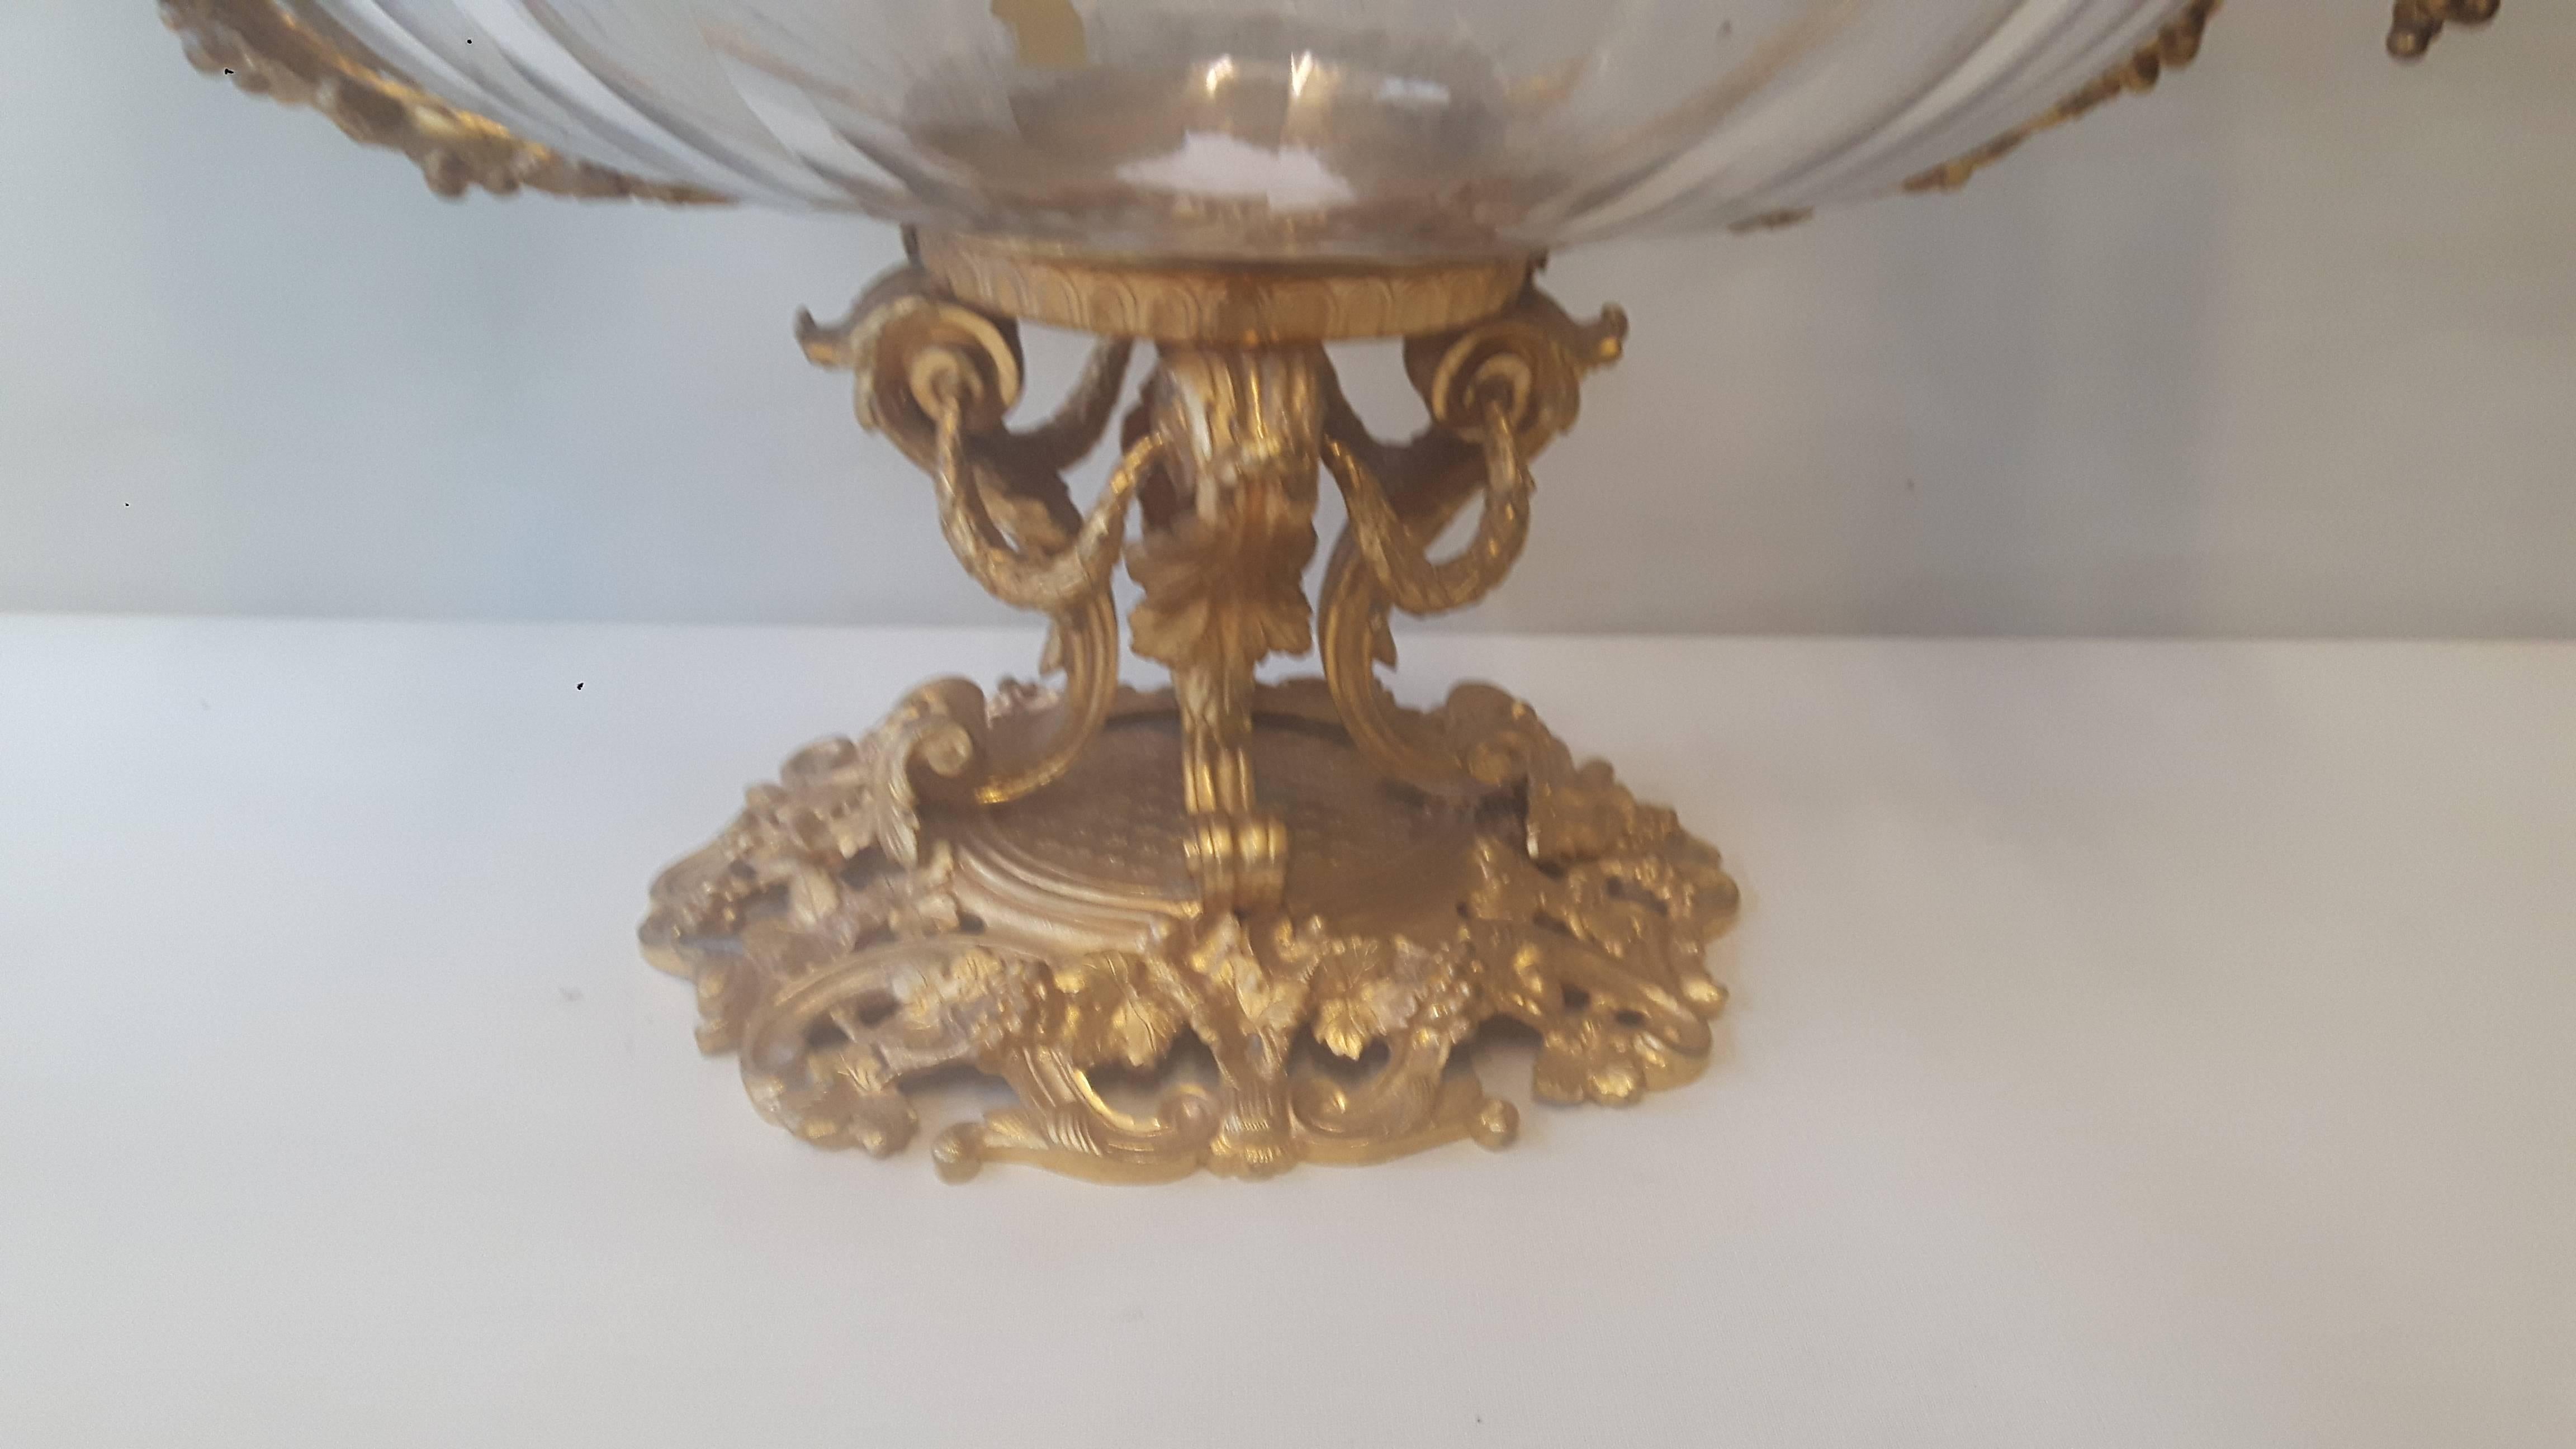 A wonderful French cut-glass (Probably Baccarat cut) and ormolu grape dish, circa 1870. The body is encased by a gilt ormolu frame, with moulded vine leaves and acorns, the handles entwined with vines around a Bacchanalian head, the whole resting on